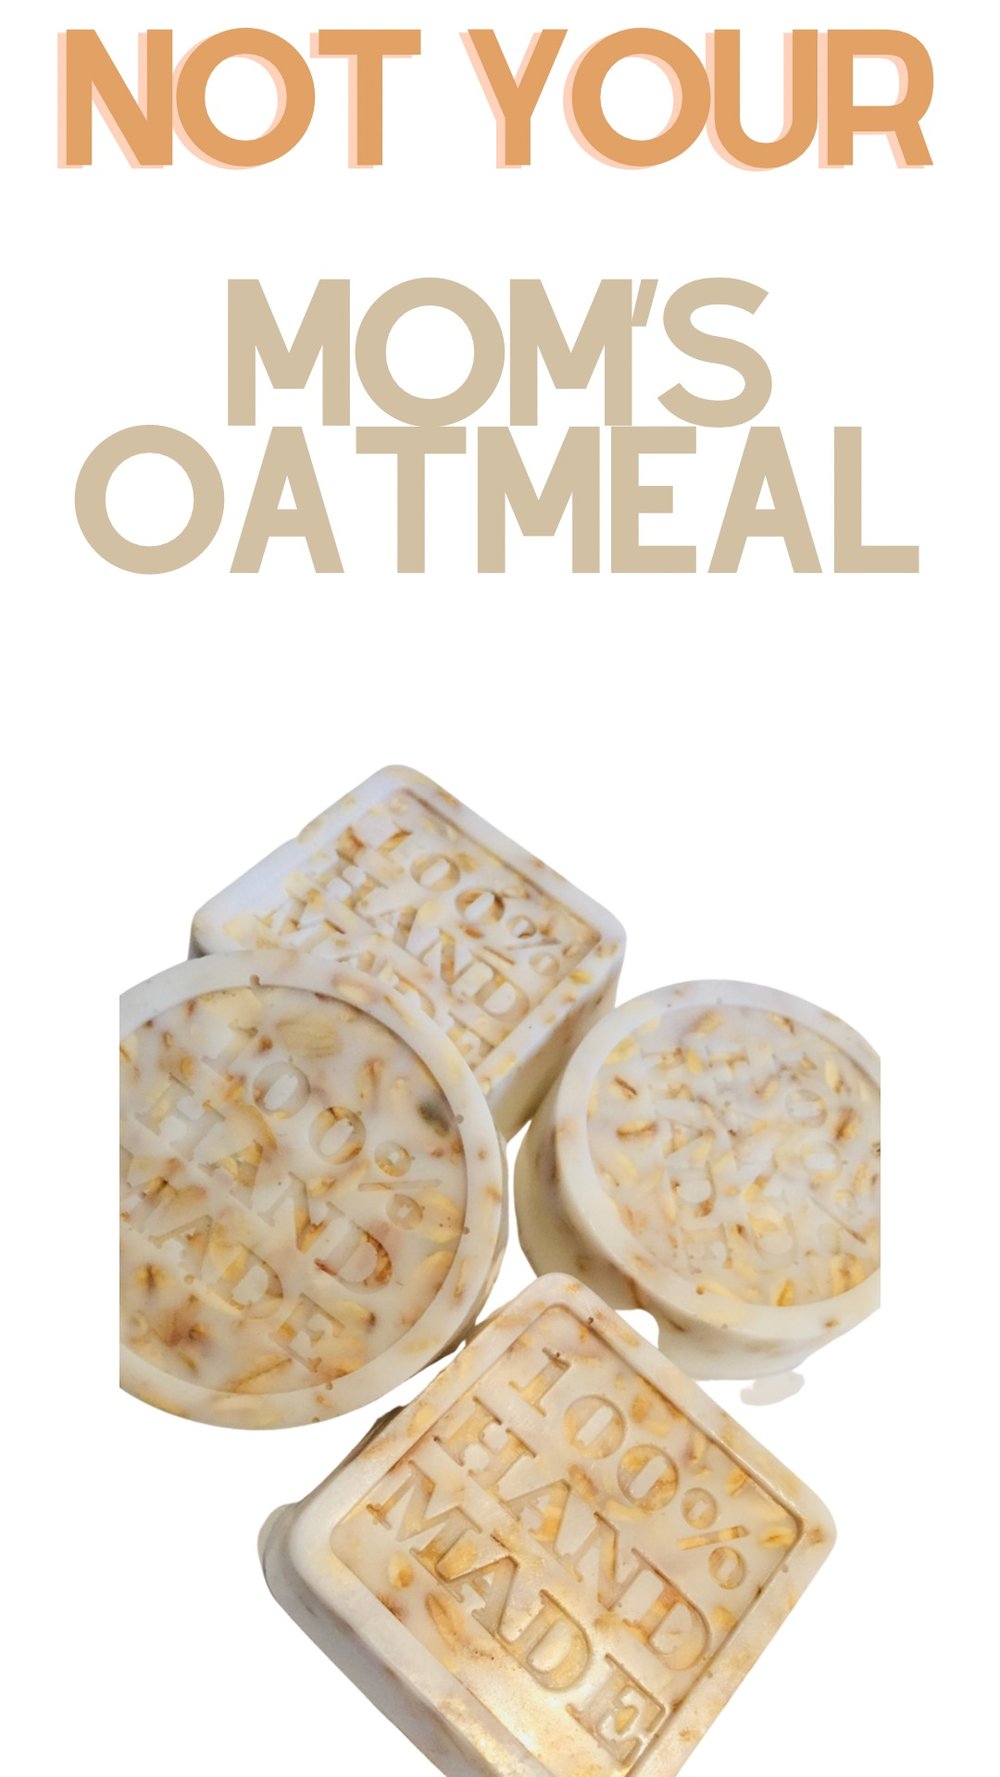 Image of Not Your Mom’s Oatmeal 